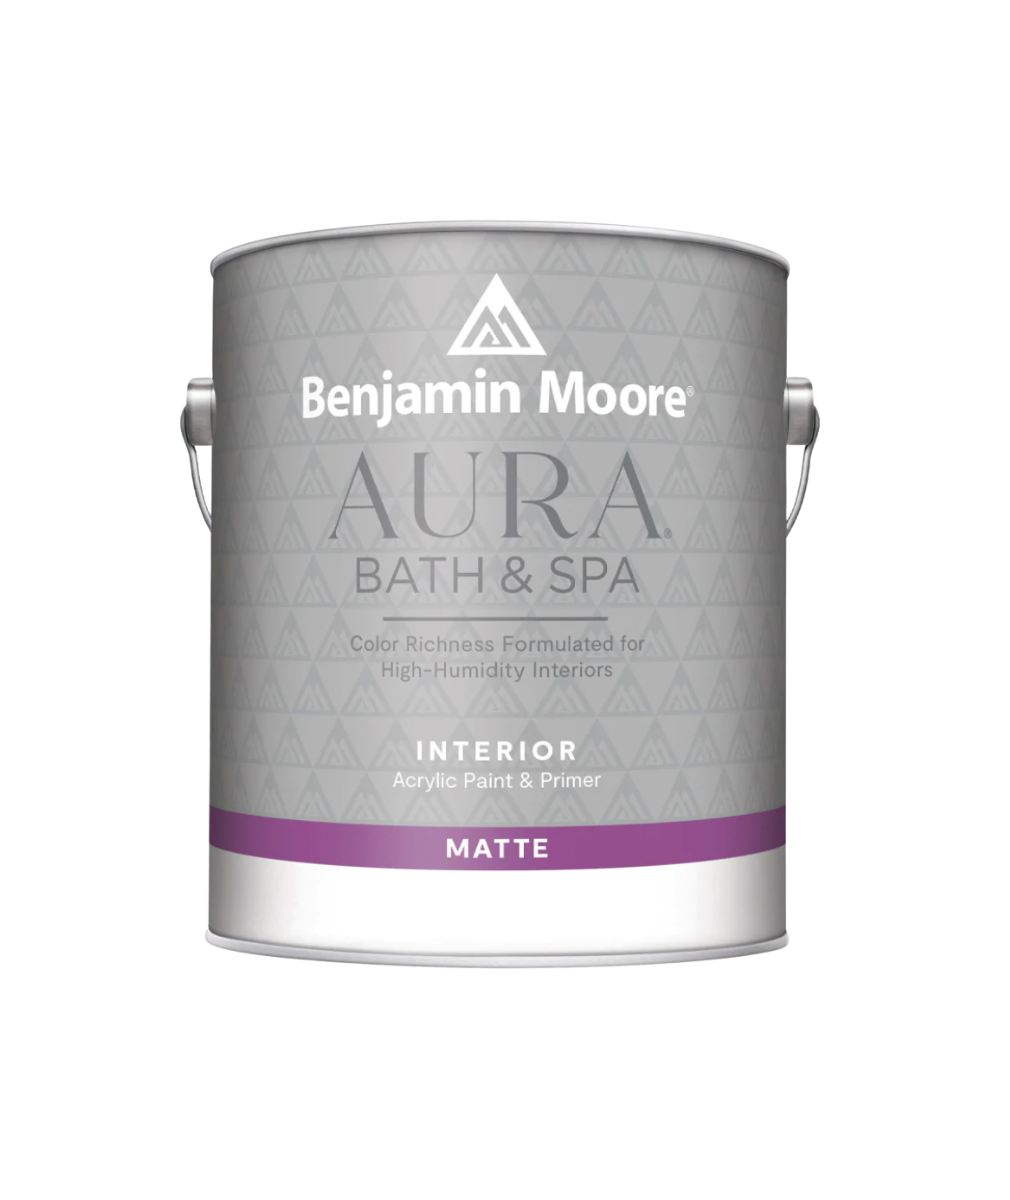 Benjamin Moore Aura Bath and Spa available in Gallons and Quarts online at JC Licht.